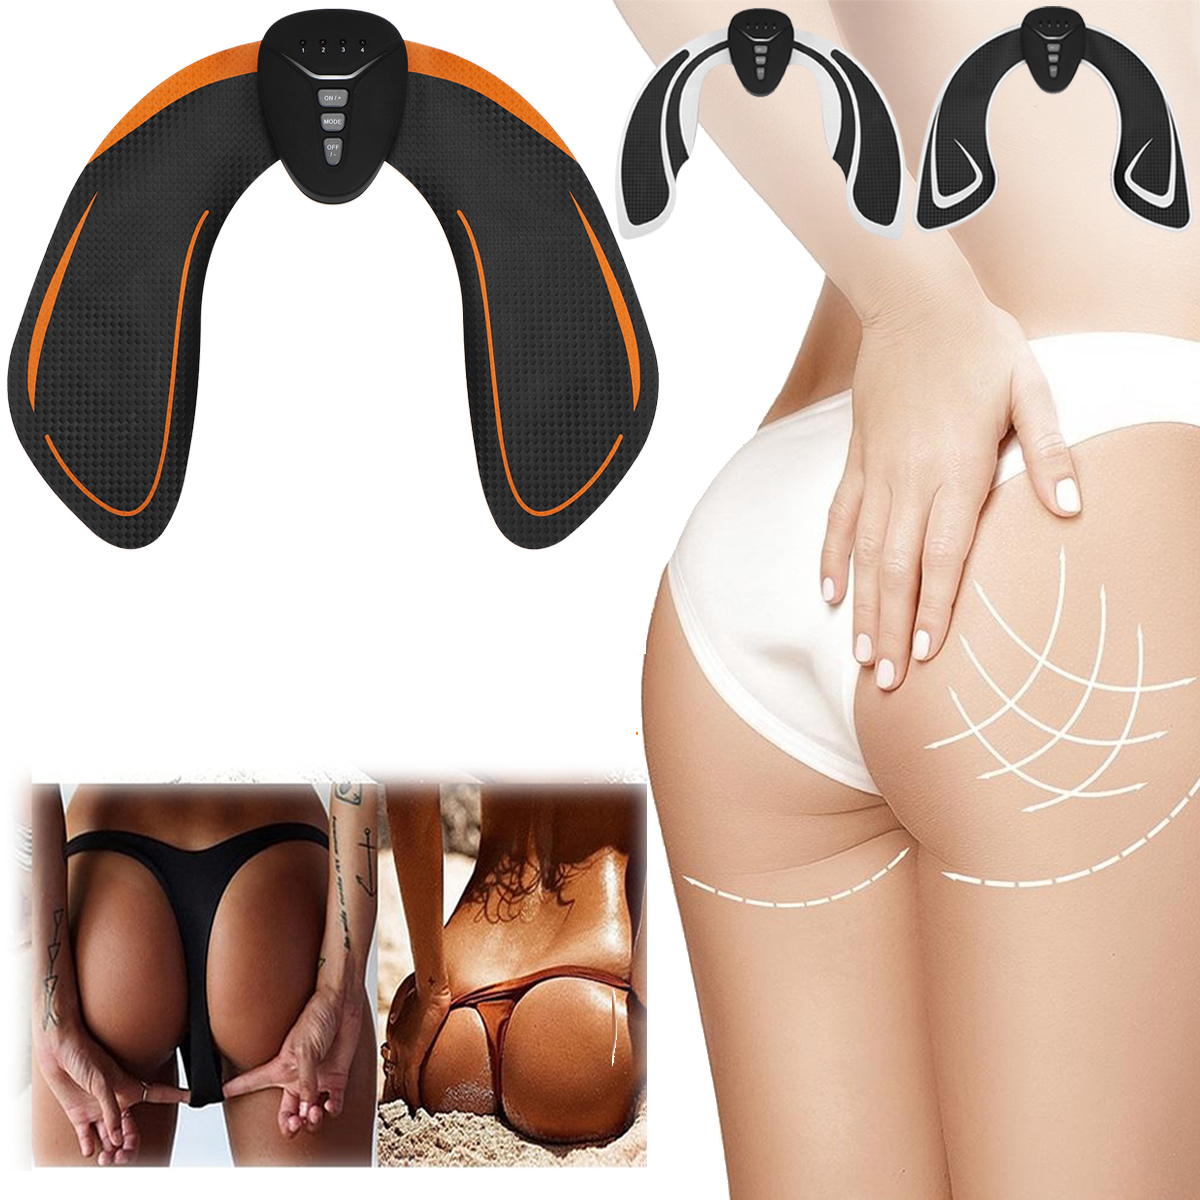 

KALOAD 6 Modes EMS Hip Trainer Lifter Buttocks Shaping Hip Massager Fitness Exercise Muscle Training